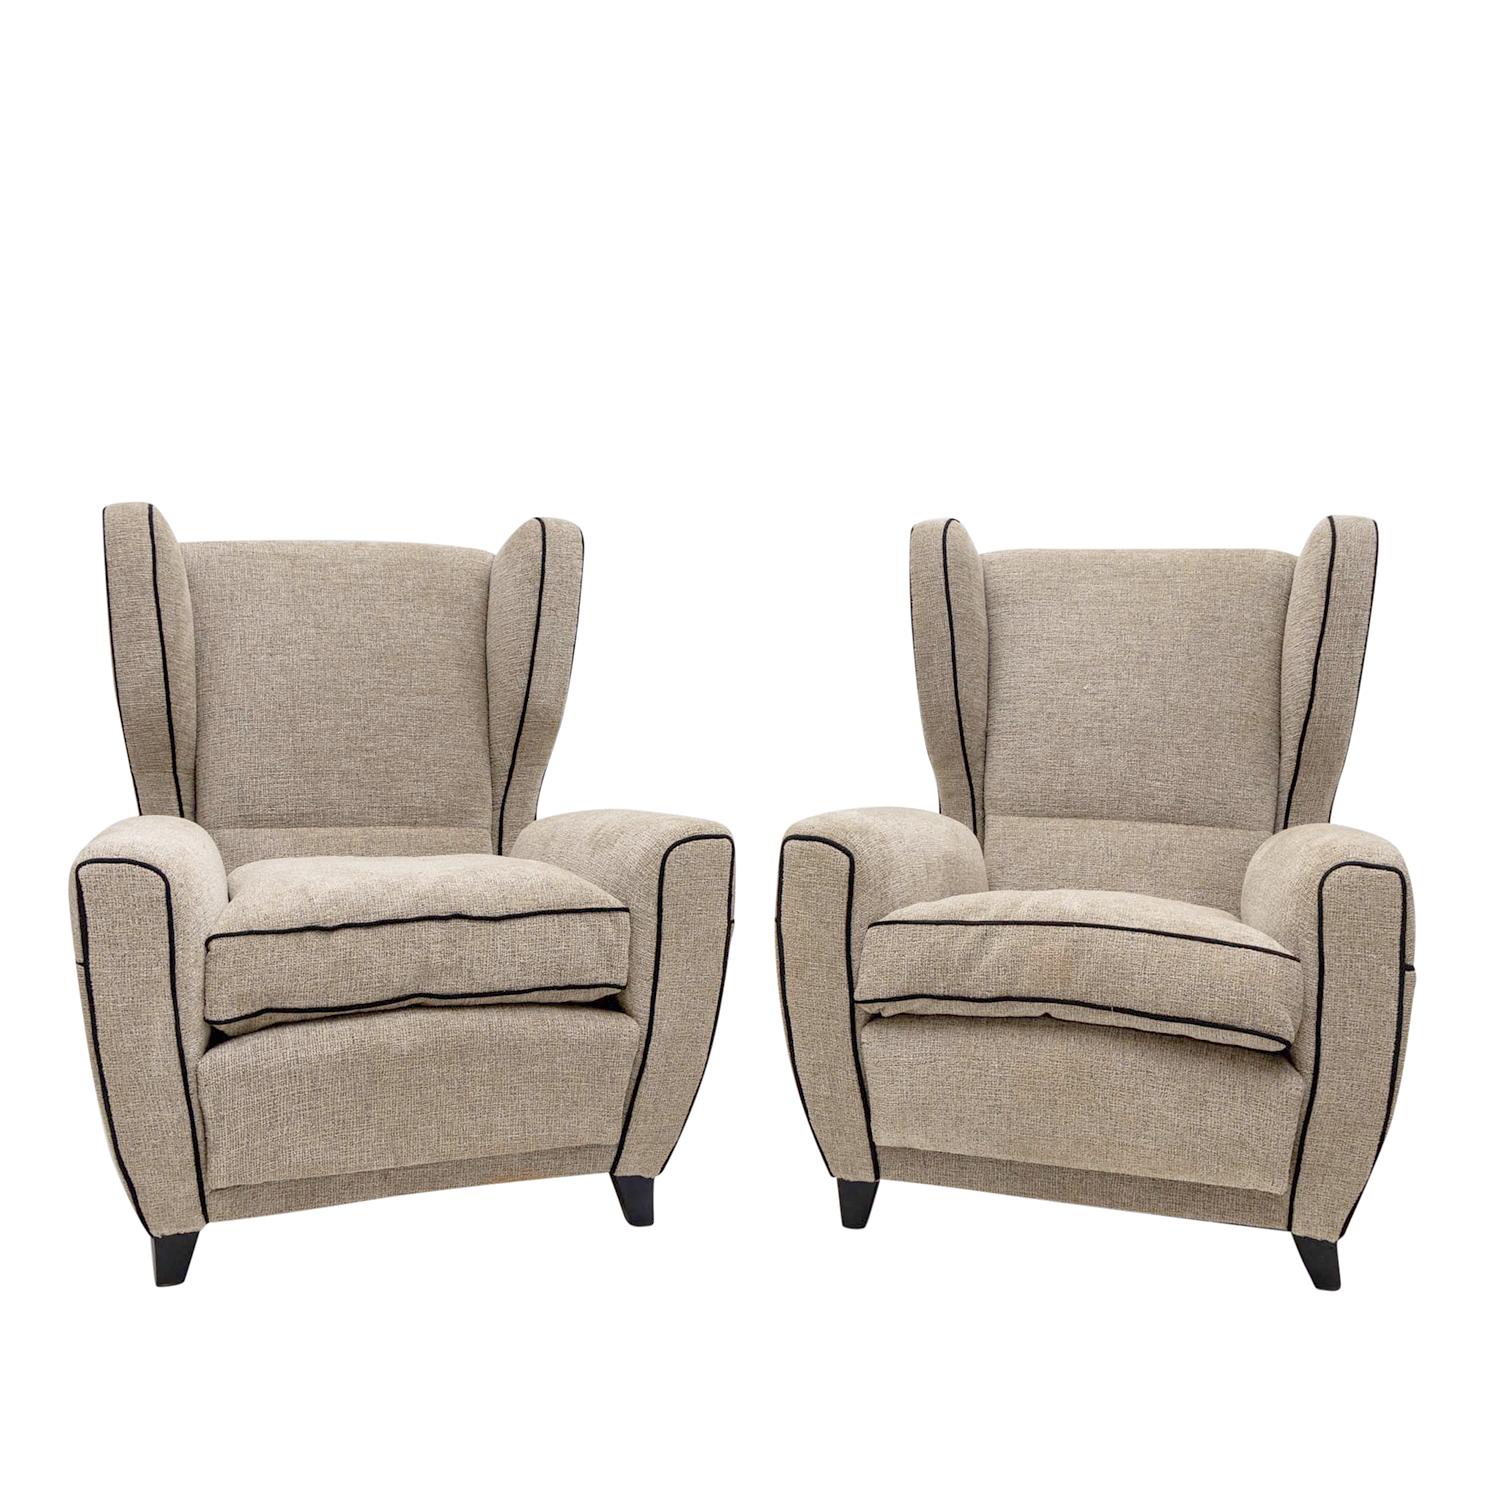 A vintage Mid-Century modern Italian pair of tall lounge chairs designed by Melchiorre Bega in good condition. The sculptural wingback chairs have a slightly inclined backrest detailed with earmuffs, headrests particularized by arched armrests,